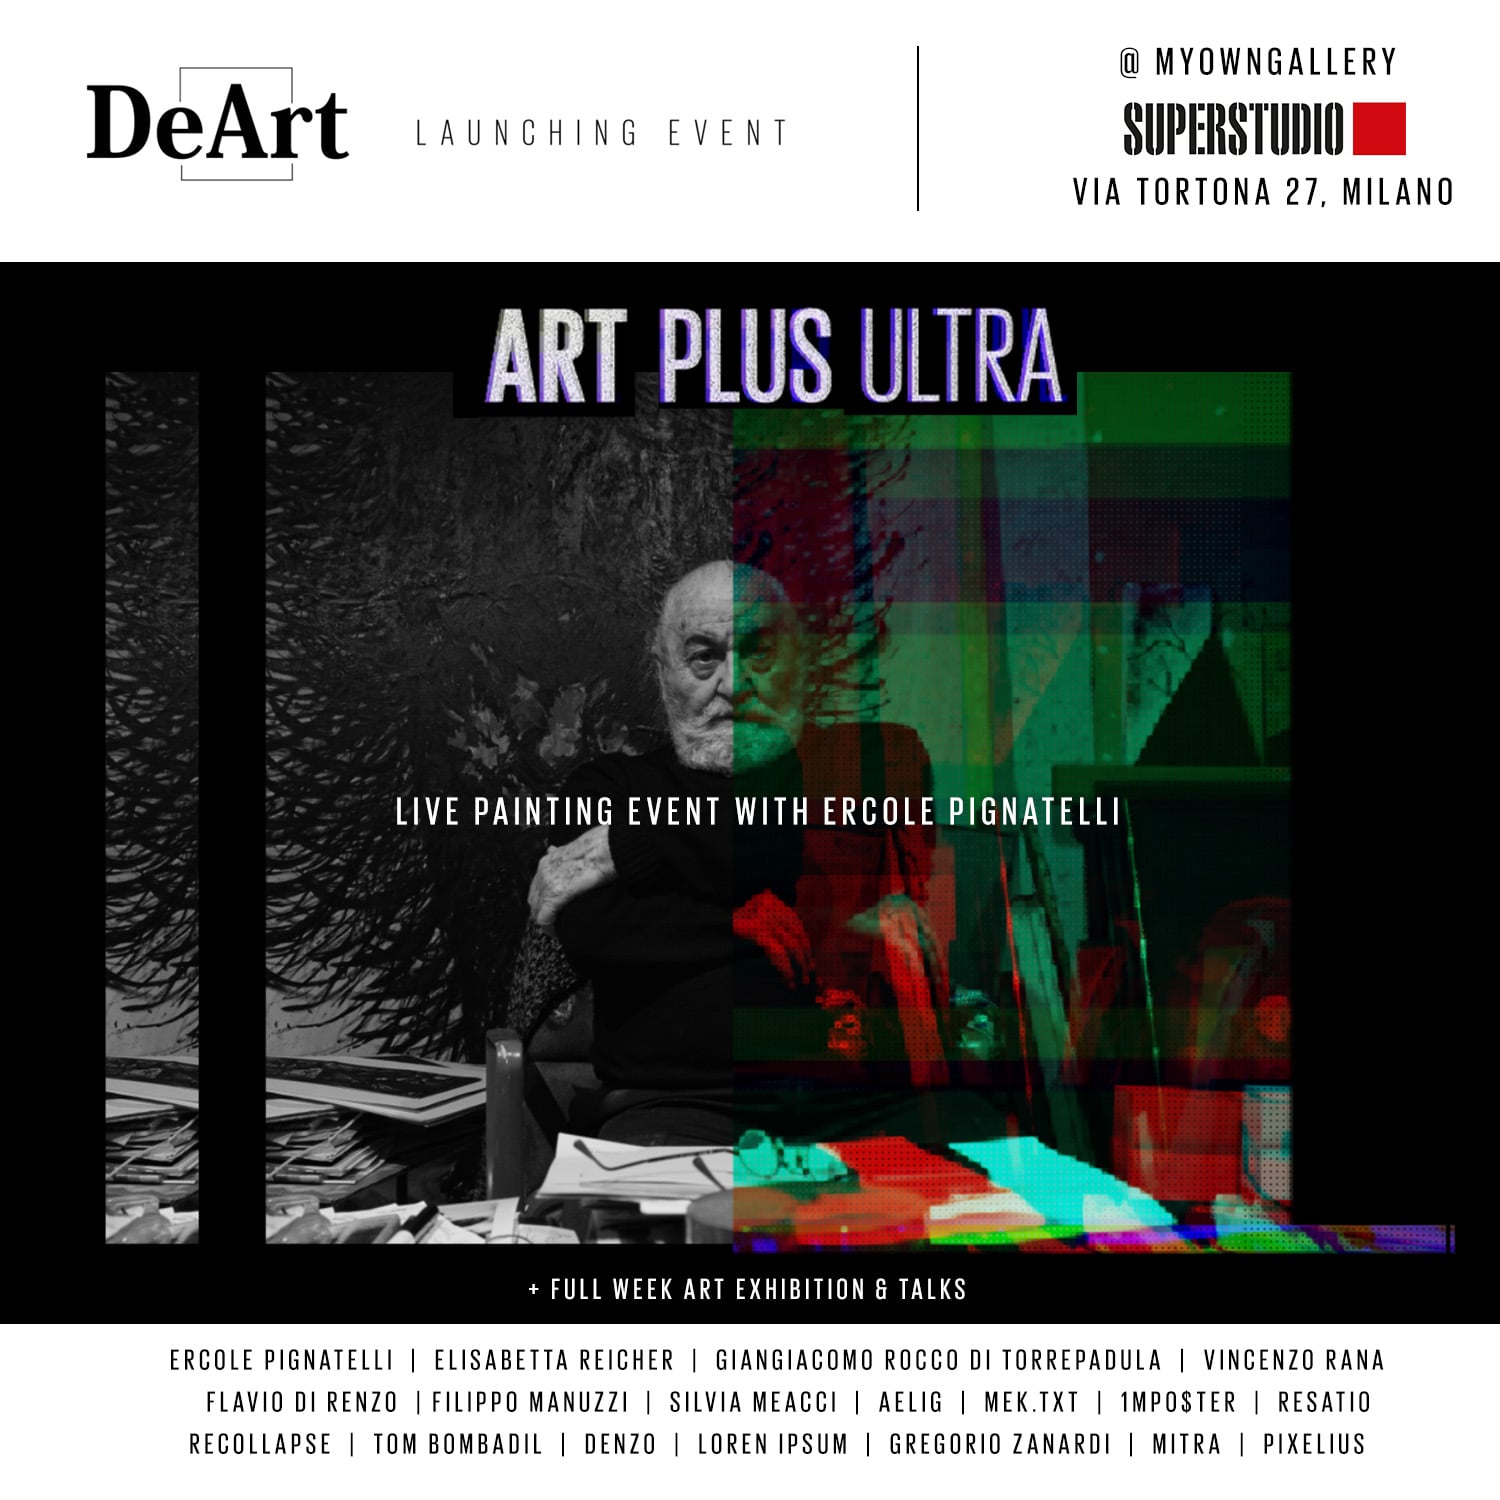 DeArt Launching Event Art Plus Ultra with AELIG NFT frames